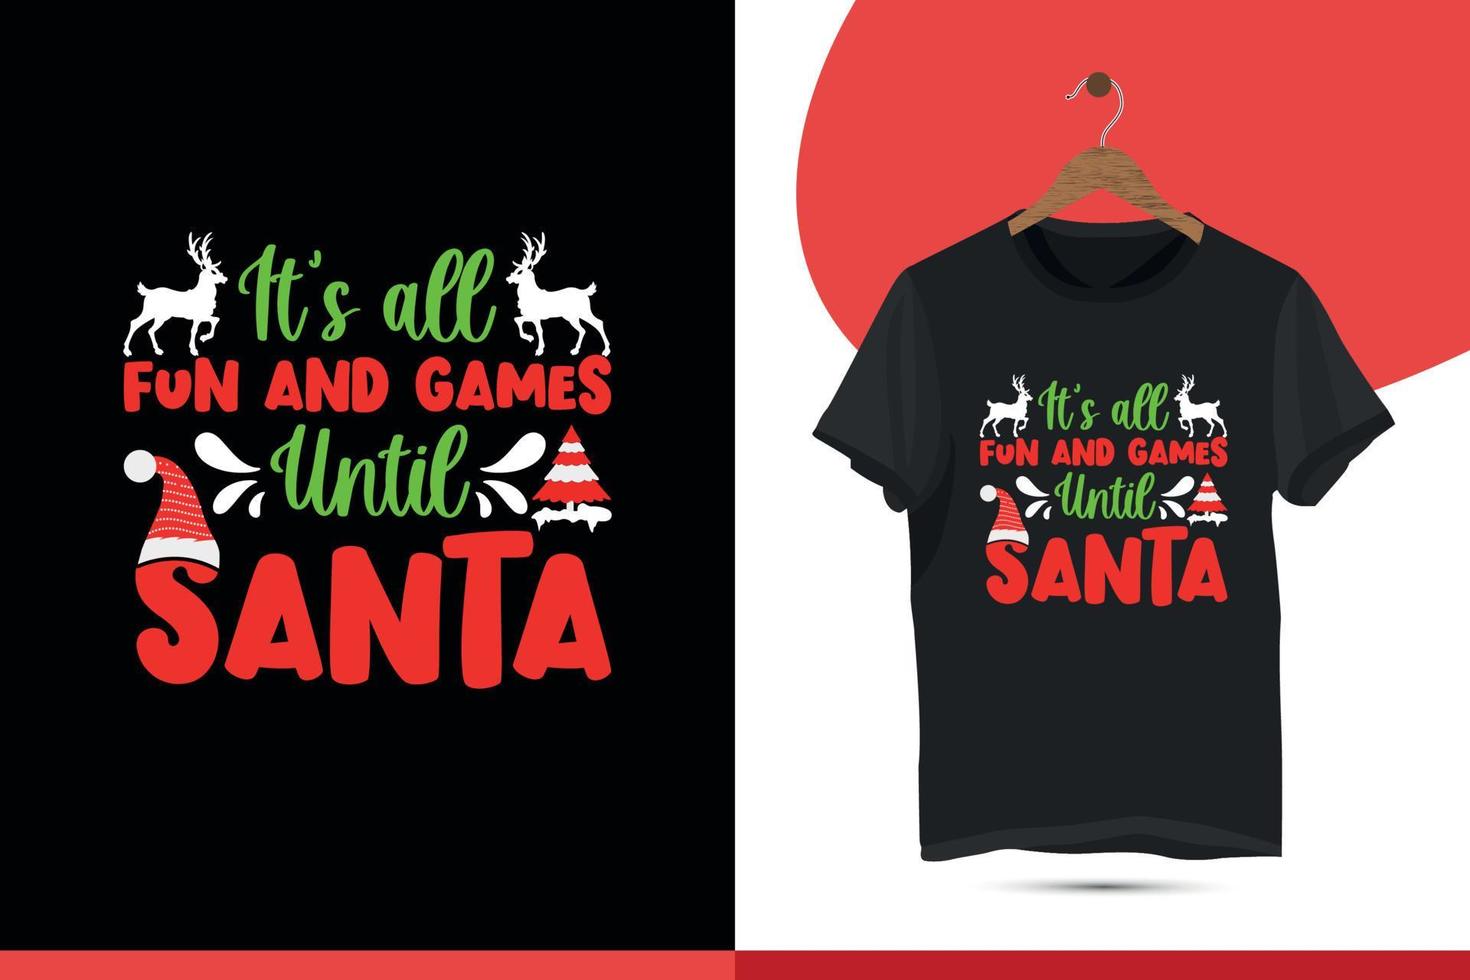 It's all fun and games until Santa - Typography Christmas T-shirt Design Template. with Santa, Deer, Tree, and  Merry Christmas Holiday Gift fun illustration vector